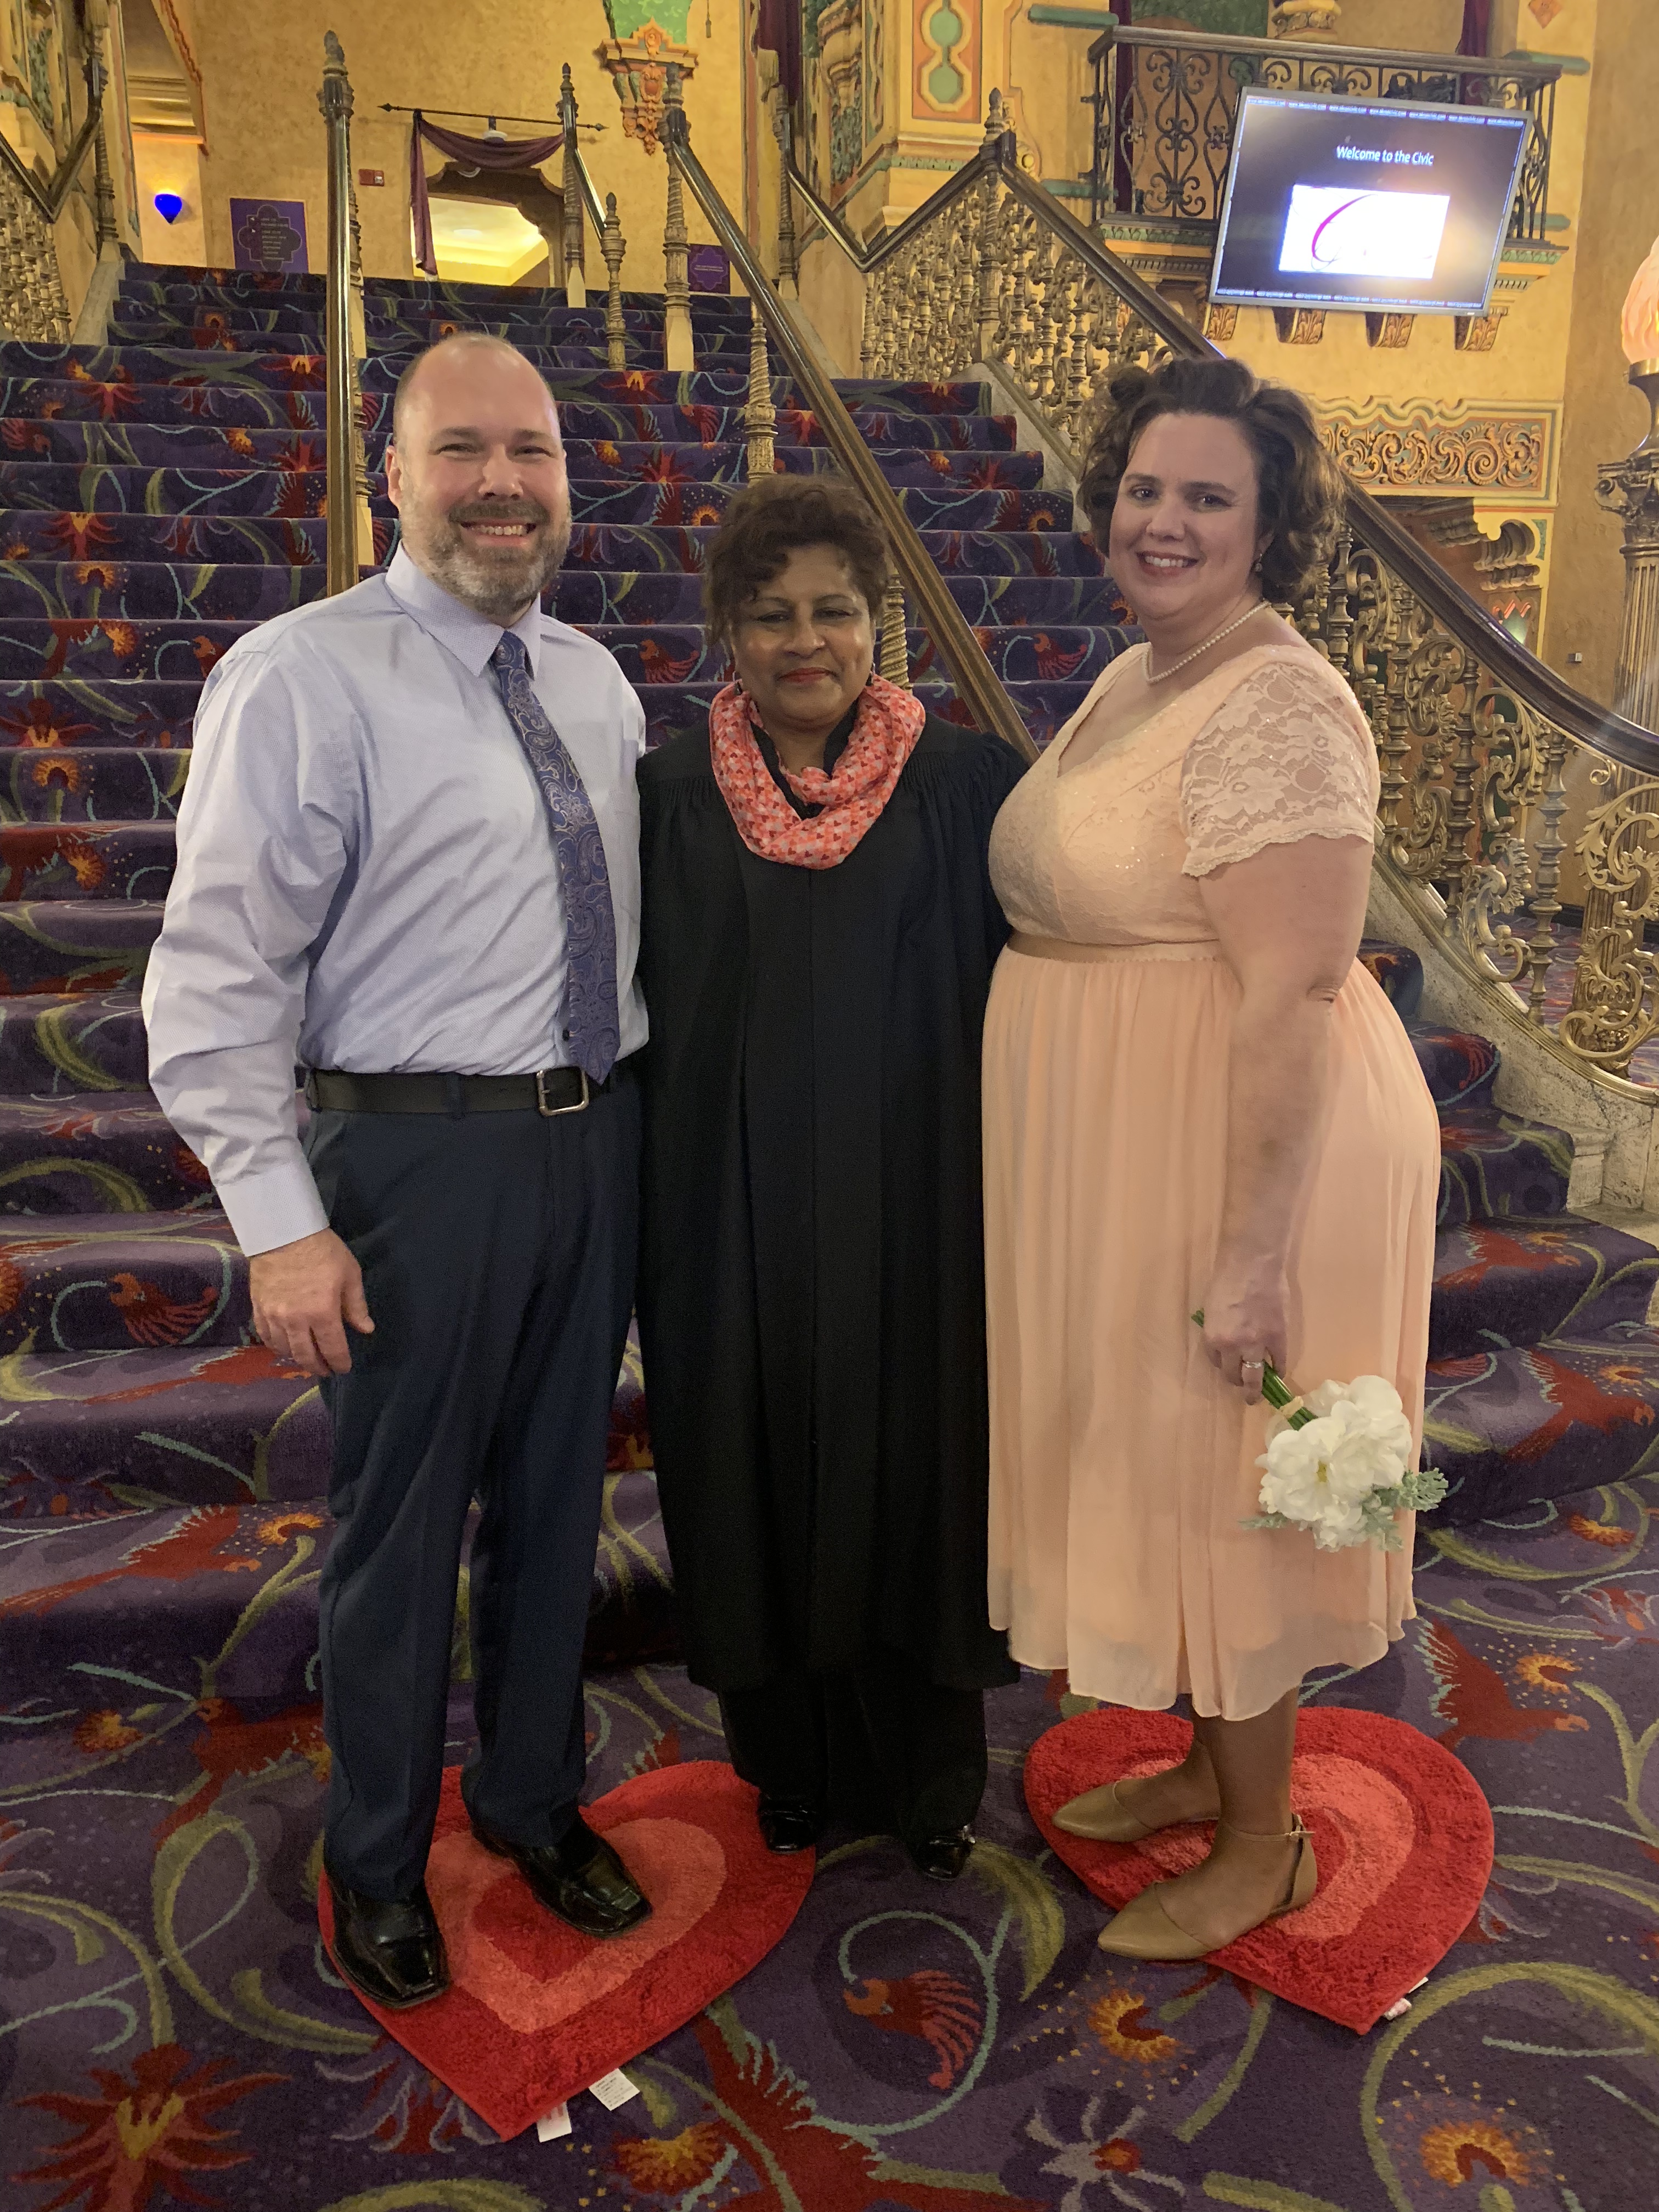 Renee and Jason Burke were married by Judge Annalisa S. Williams on Valentine’s Day 2020 at the Akron Civic Theatre